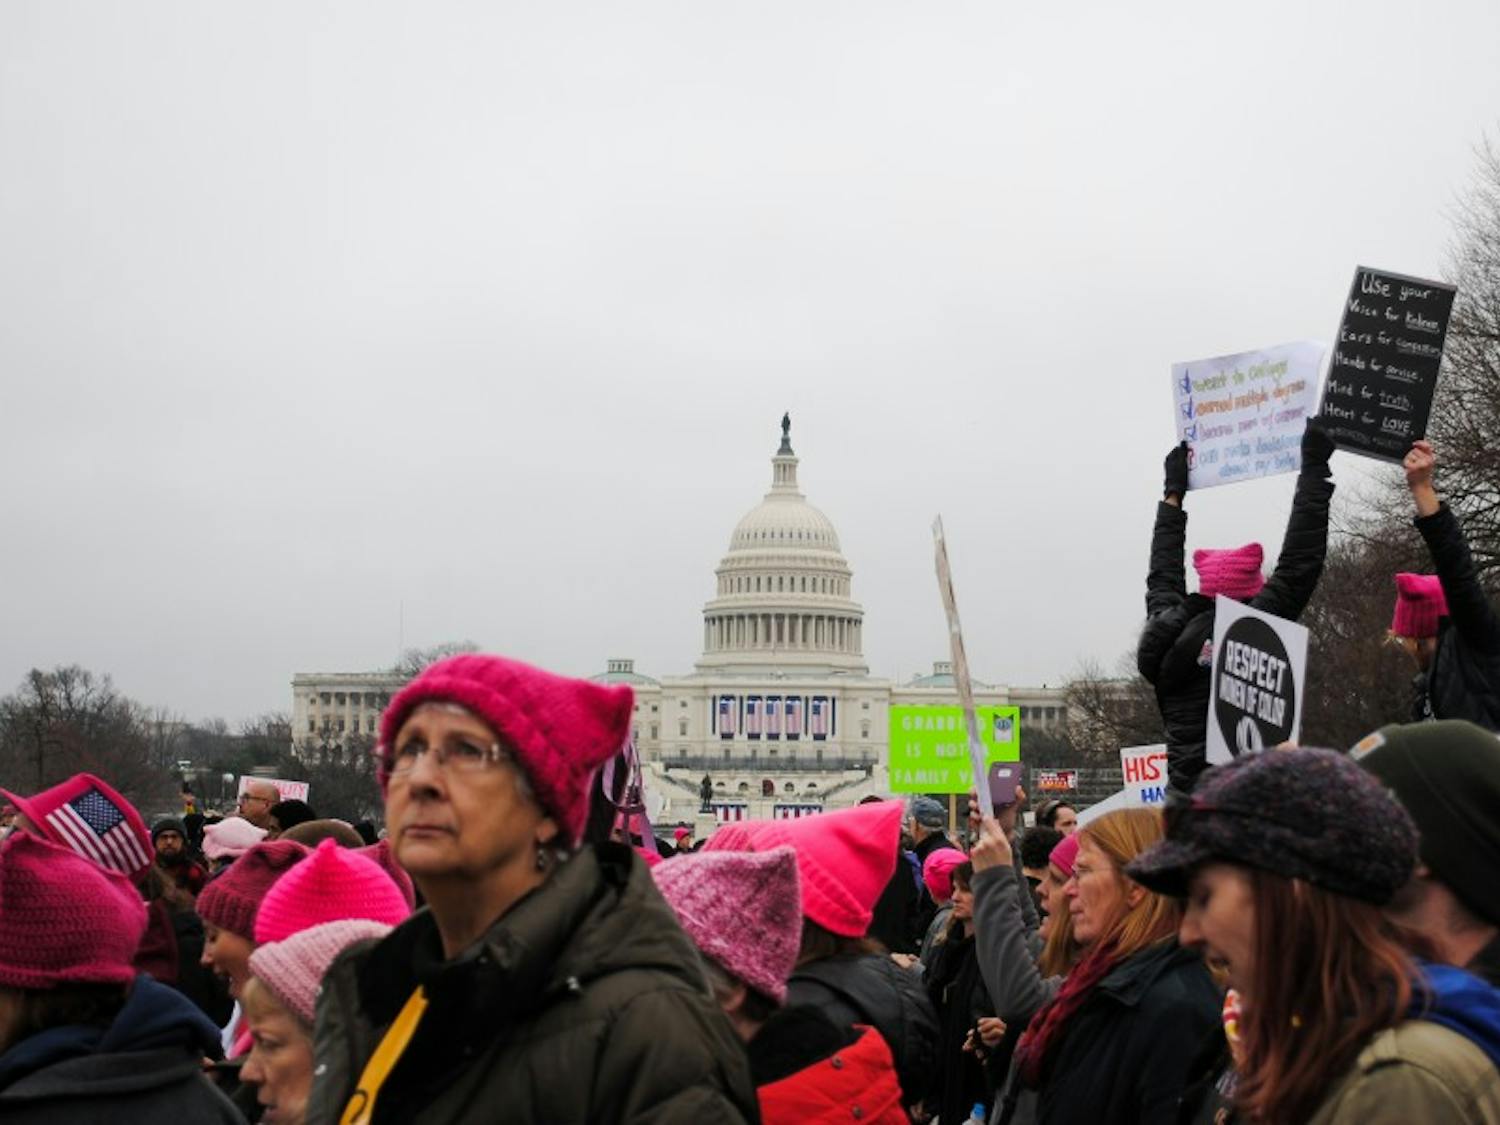 People of all identities from various countries marched passed the United States Capitol building holding signs that supported organizations such as Planned Parenthood and criticized newly inaugurated President Donald Trump at the Women’s March on Washington Saturday.